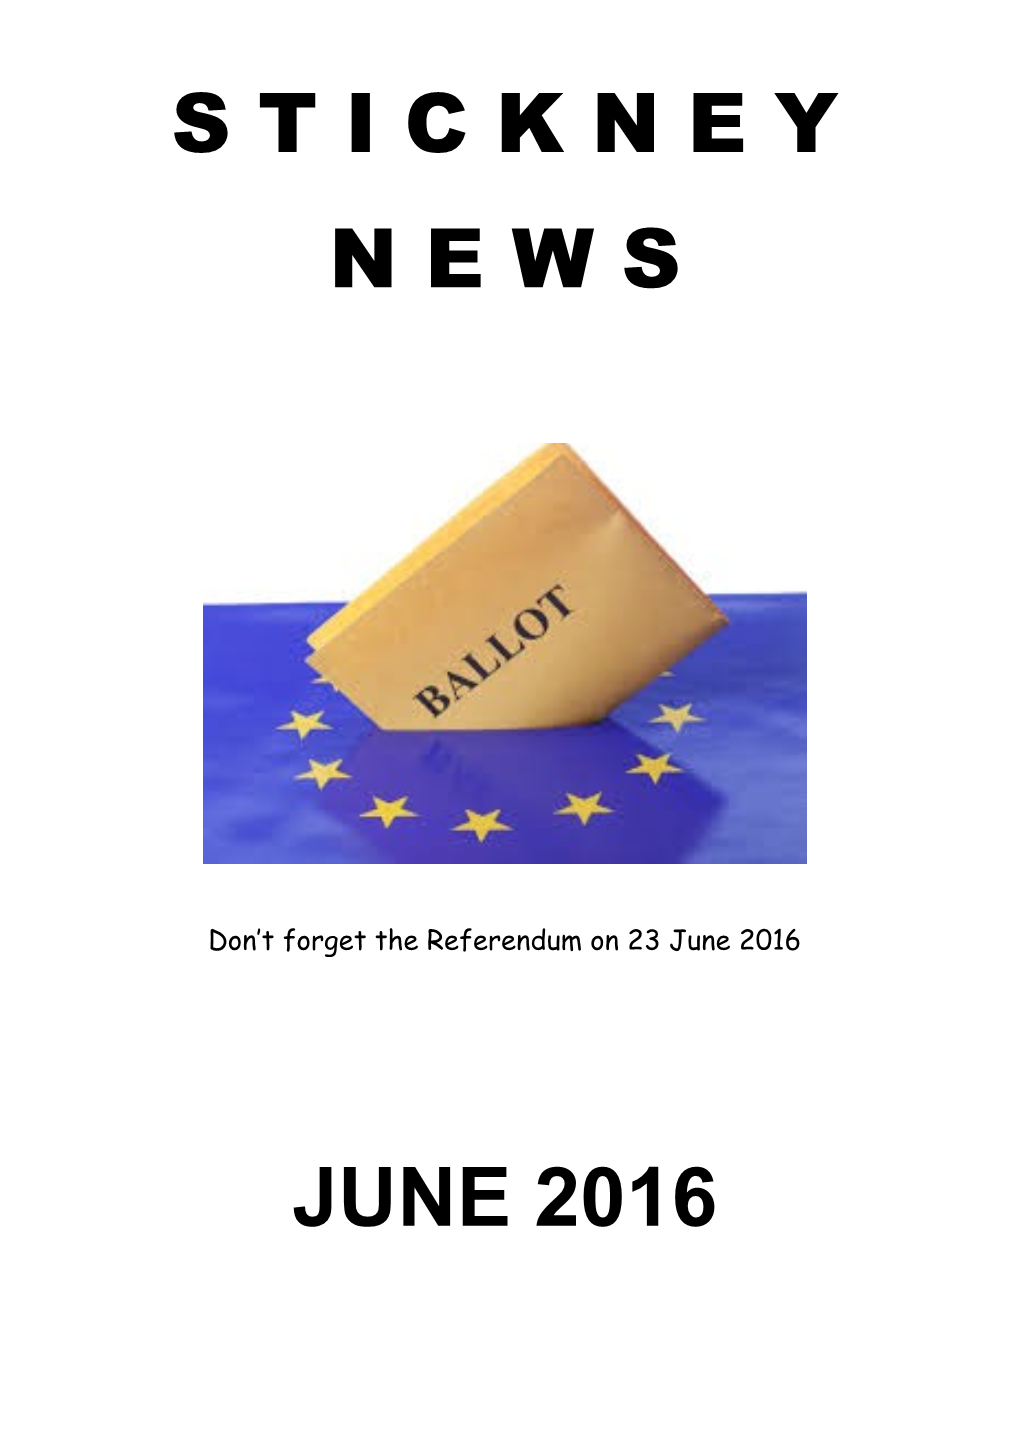 Don T Forget the Referendum on 23 June 2016